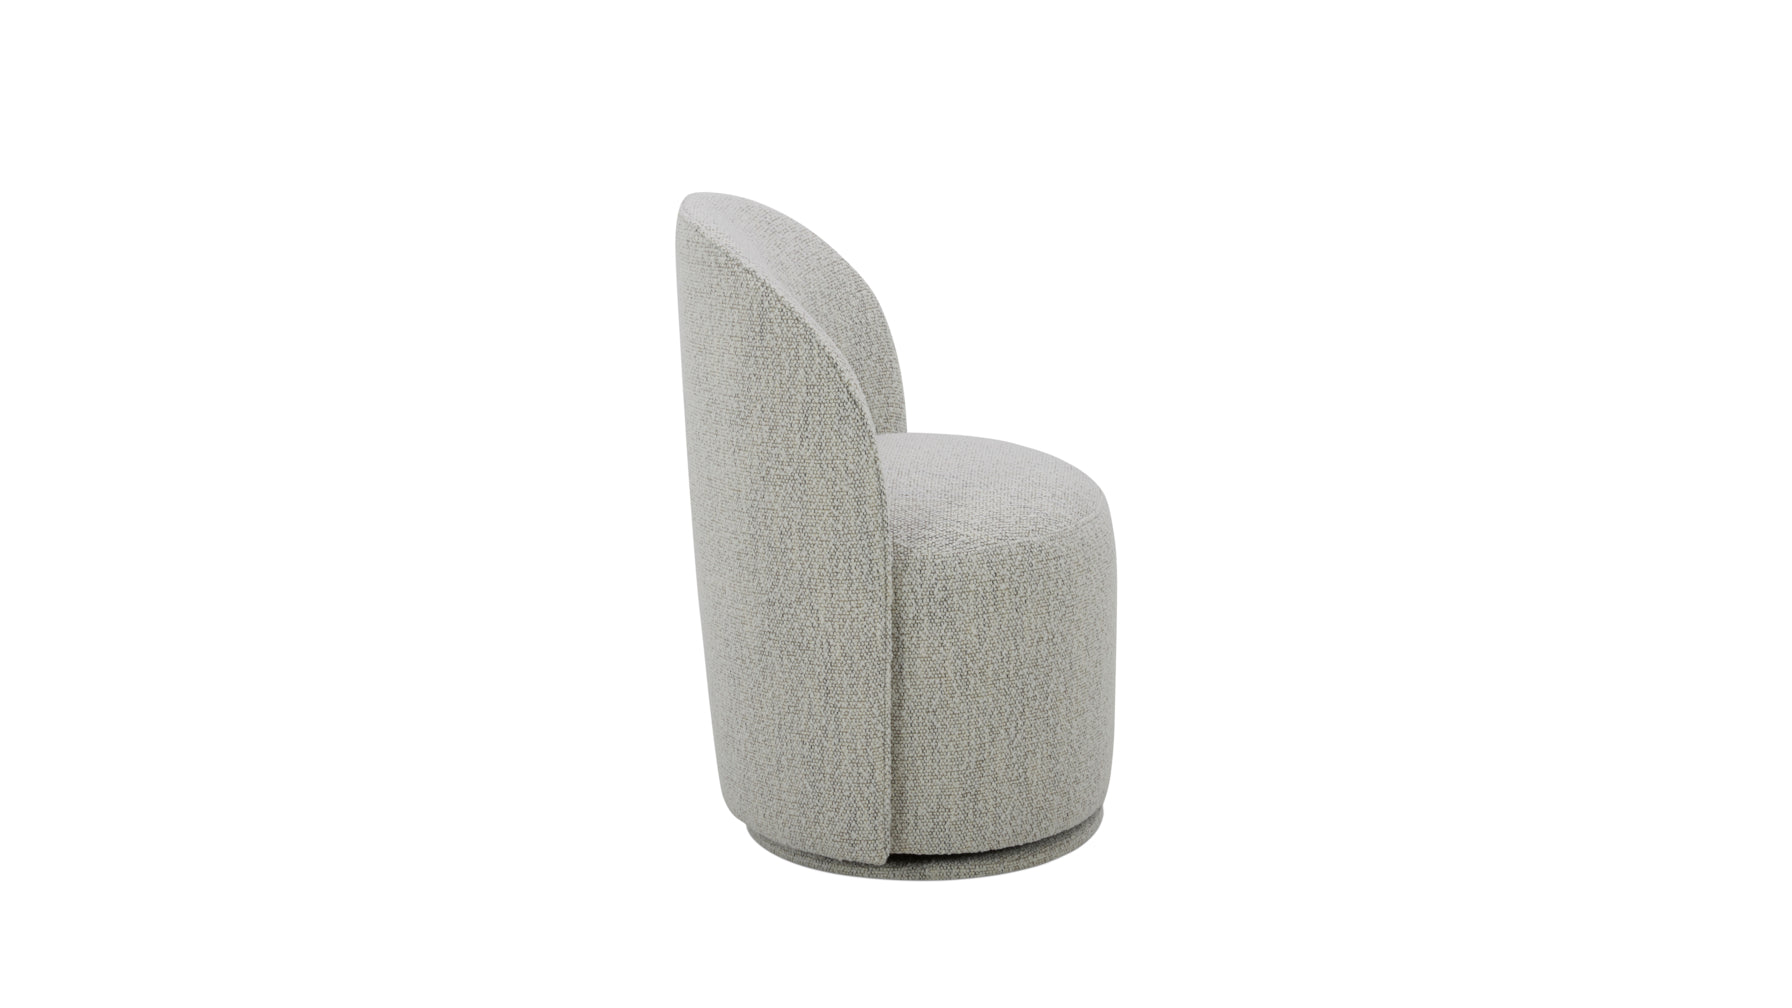 Dialed In Swivel Dining Chair, Arctic - Image 5